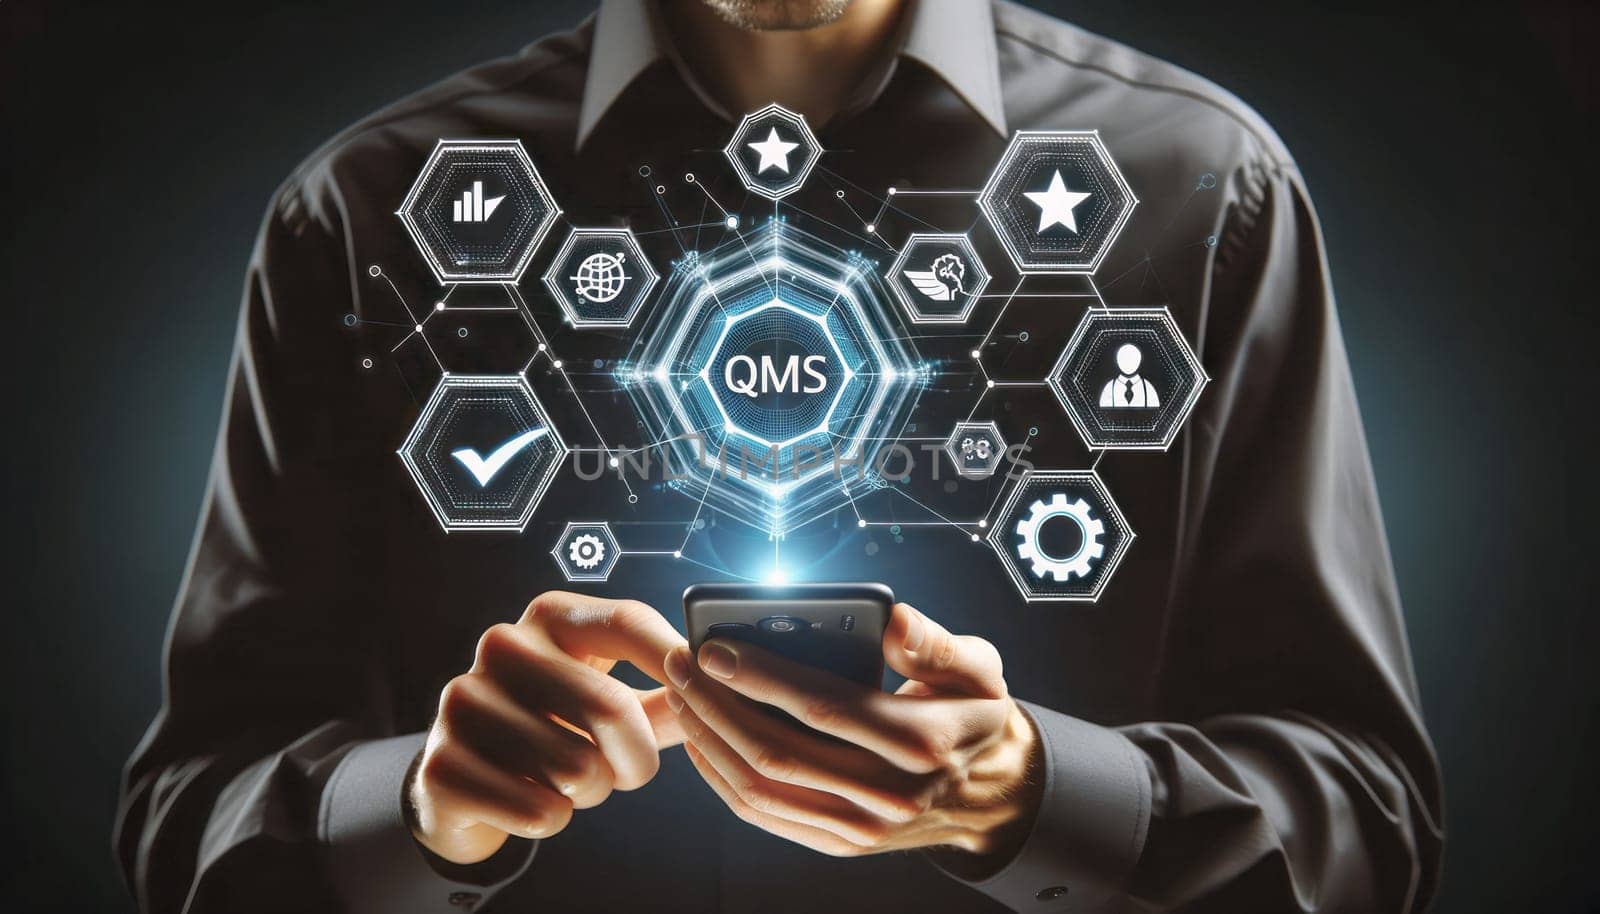 A digital composite image of a person in a dark shirt using a smartphone with a holographic overlay of hexagonal icons connected by lines. The central hexagon is illuminated in blue and labeled 'QMS', surrounded by other icons representing a star rating, a team, gears, and a quality assurance badge, symbolizing different aspects of a Quality Management System. The background is dark with a shallow depth of field to focus on the hands, phone, and the holographic elements.